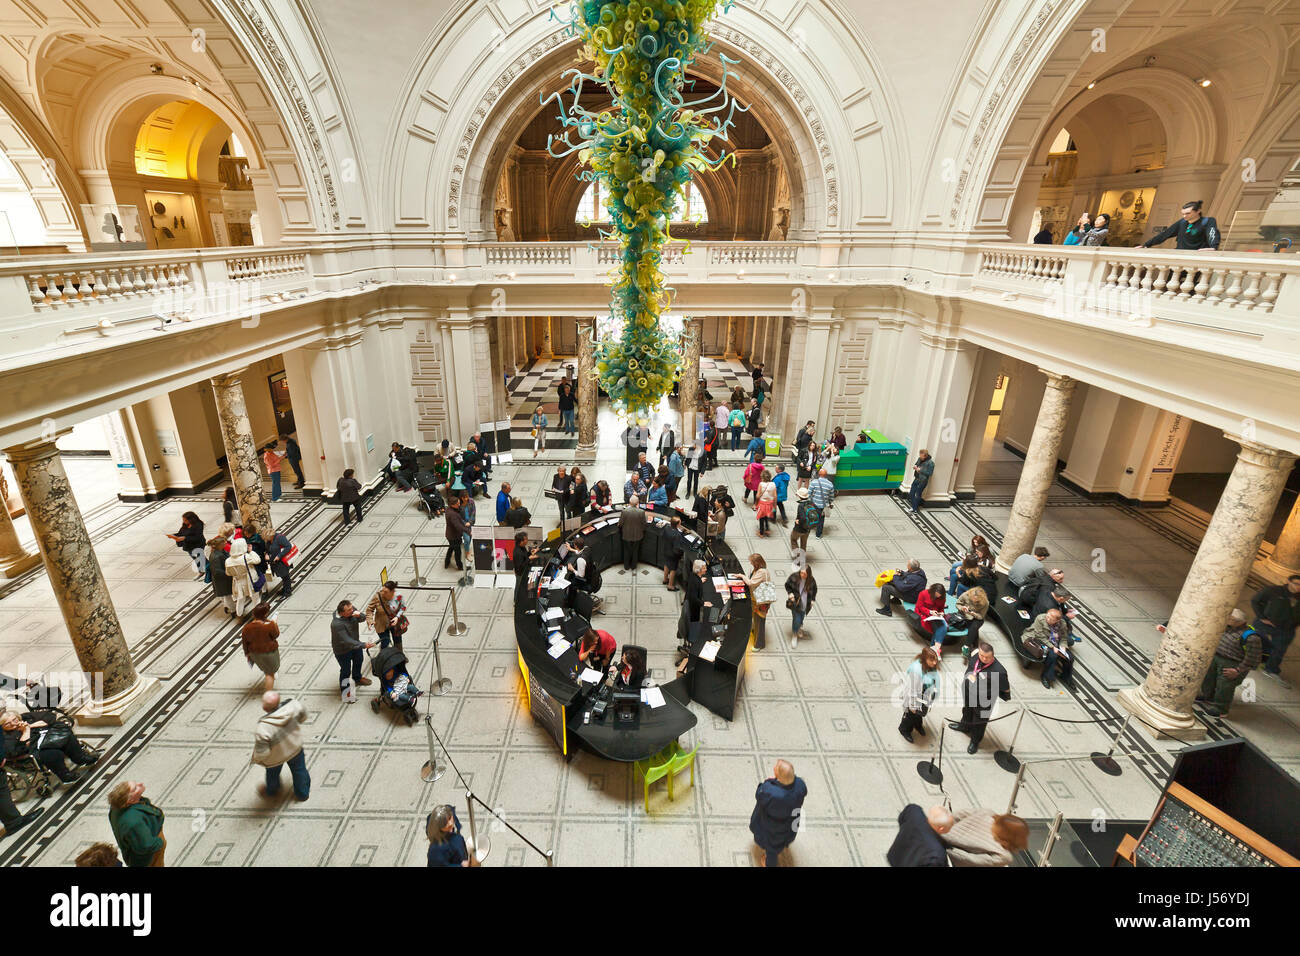 The foyer in the Victoria and Albert Museum, London. Stock Photo